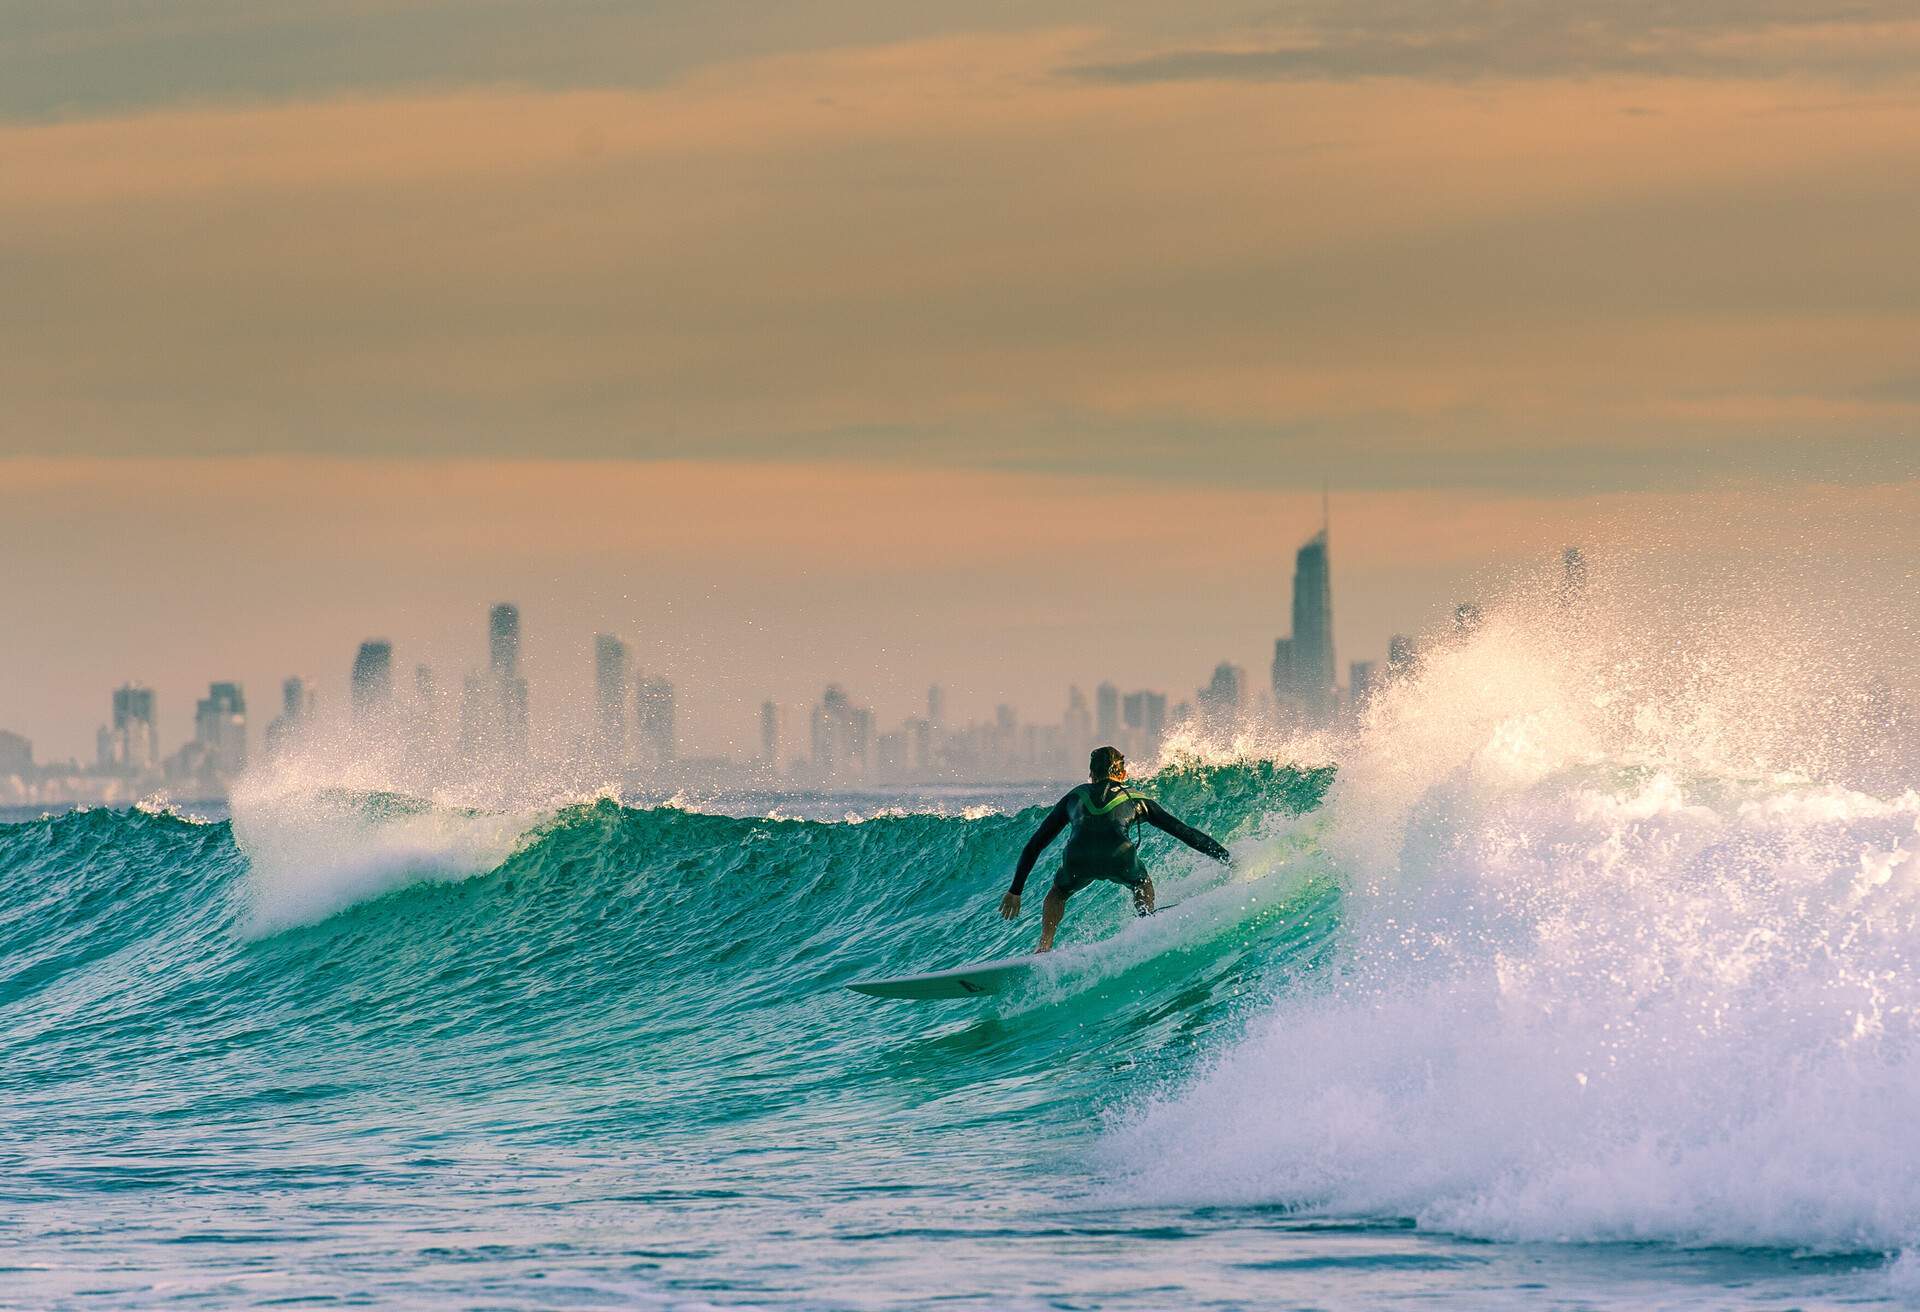 A morning surf on the gold coast. Sunrise near snapper rocks with Surfers Paradise in the background